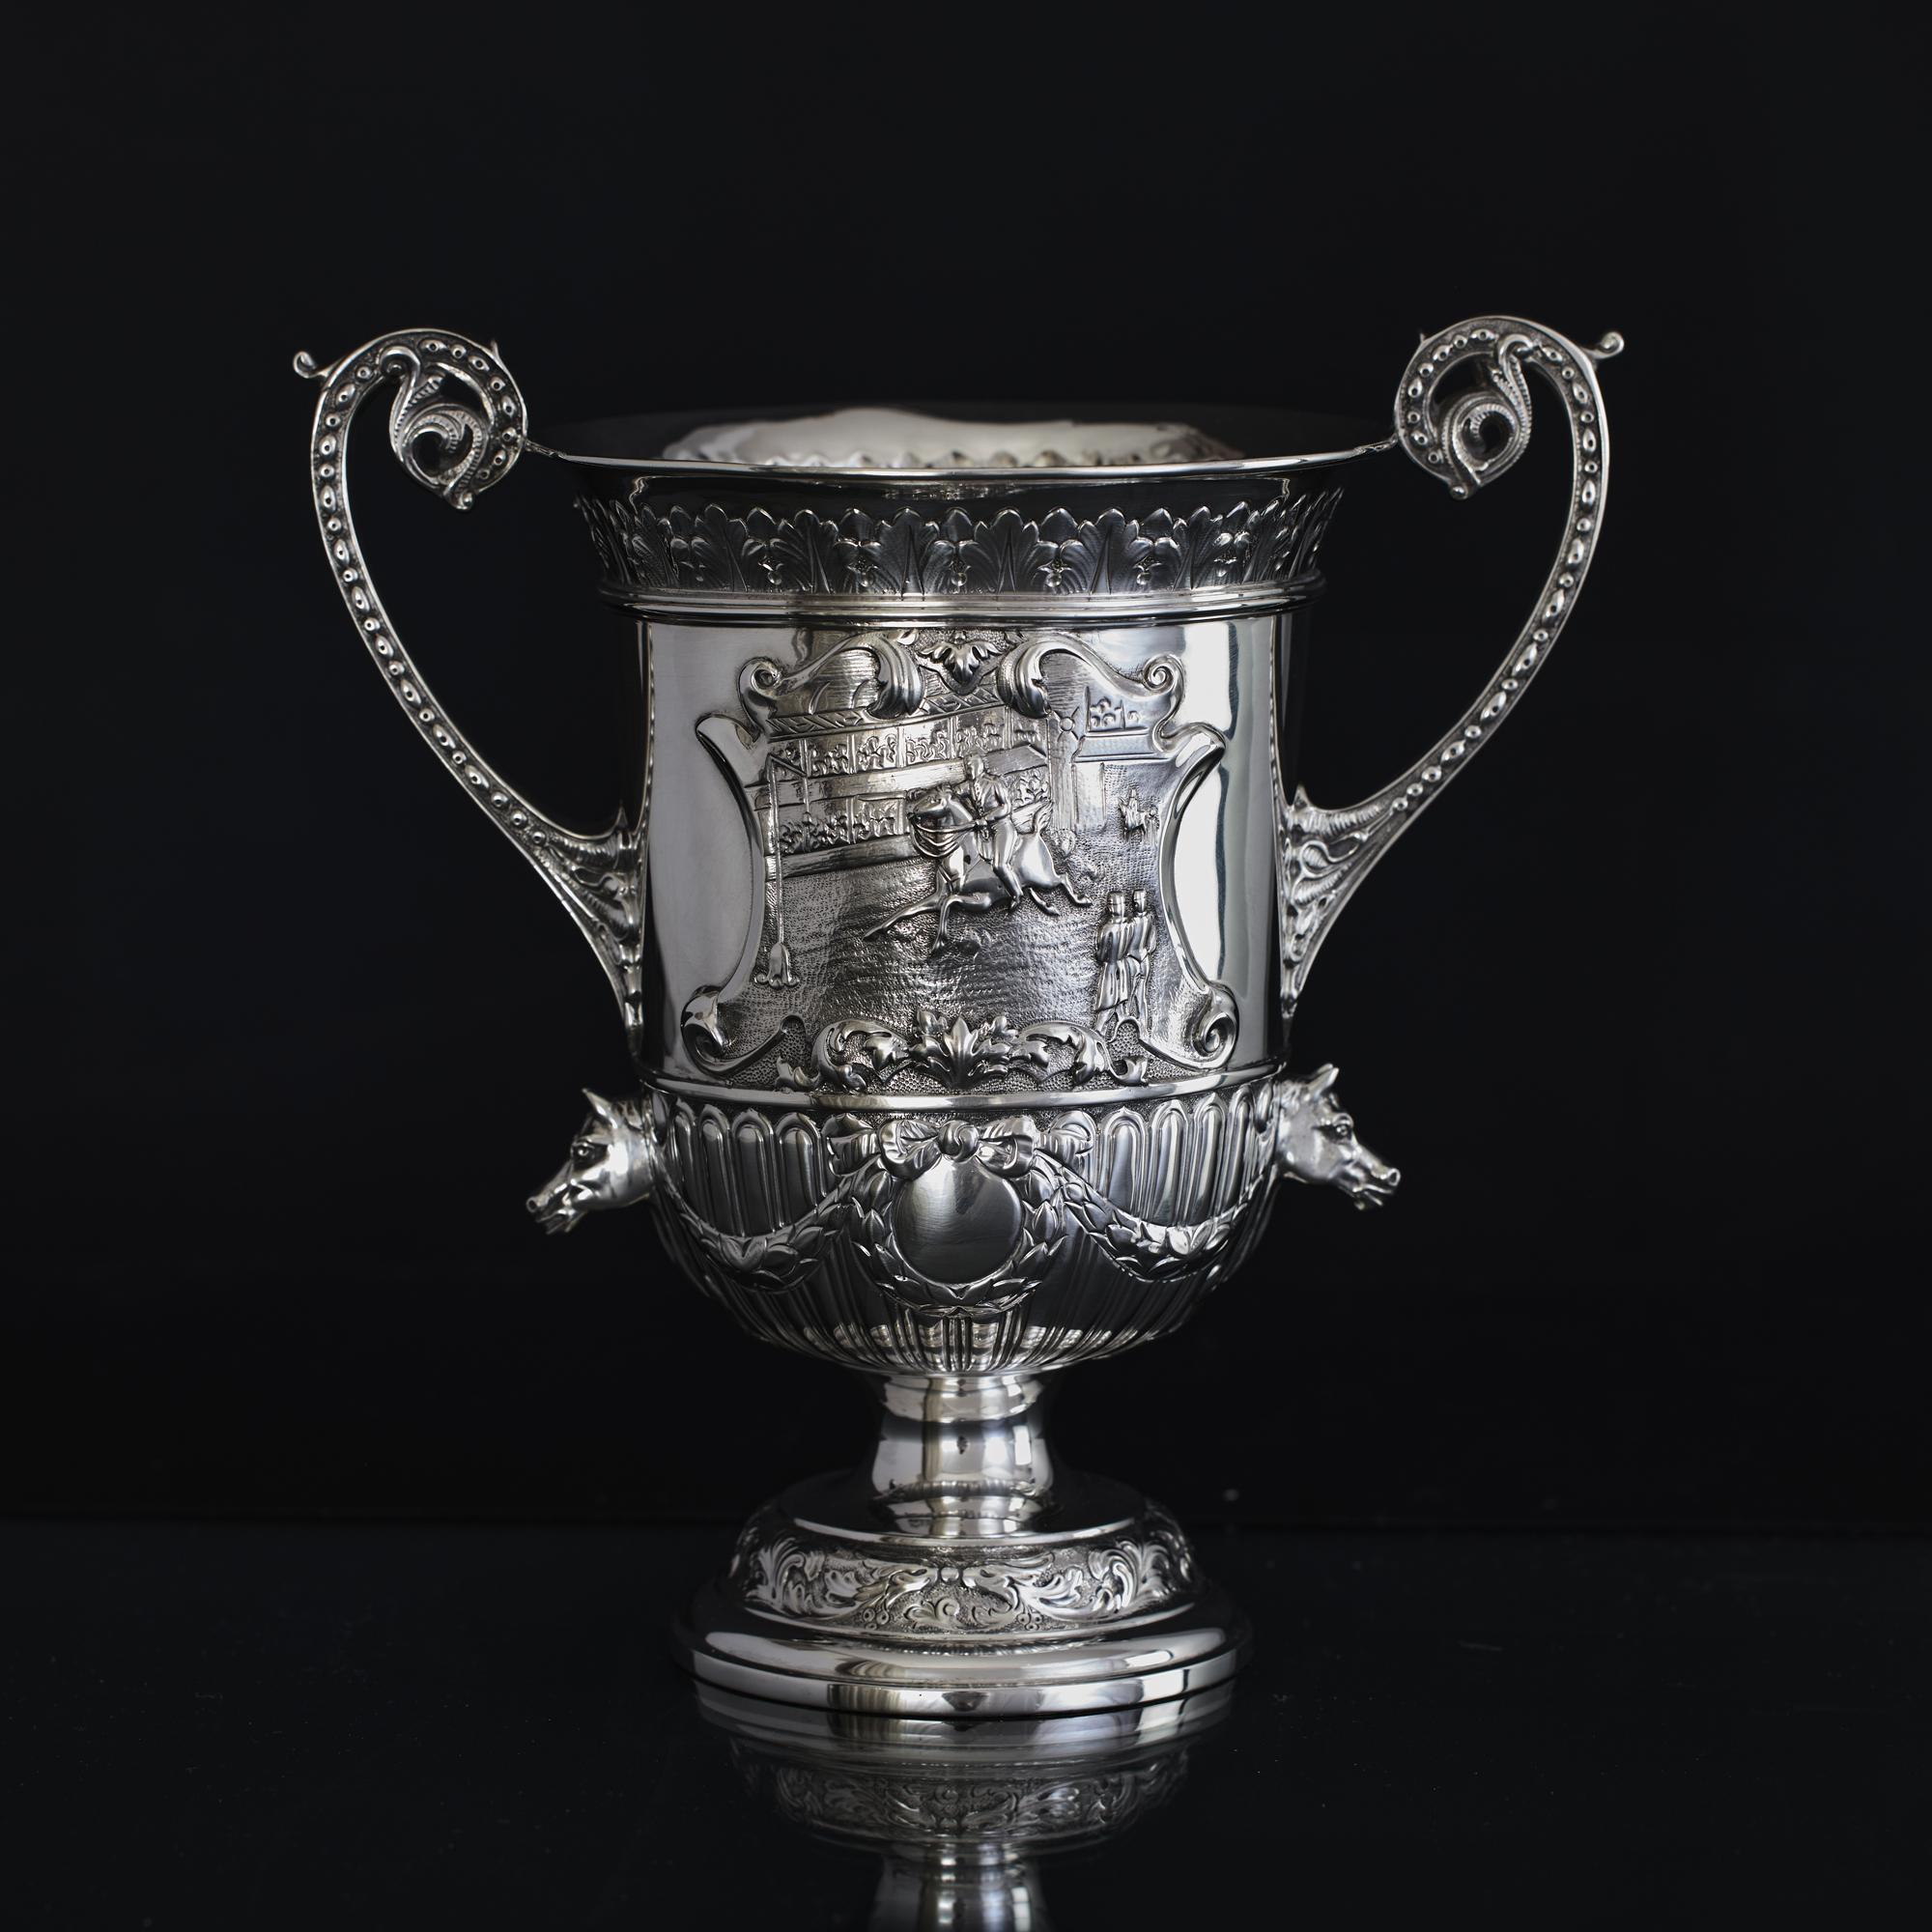 Unusual antique two-handled silver trophy cup with cast and hand chased detail including a cavalry horse riding scene depicting a competition of horsemanship inside an arena. There is further decoration of acanthus leaves, fluting, wreaths and